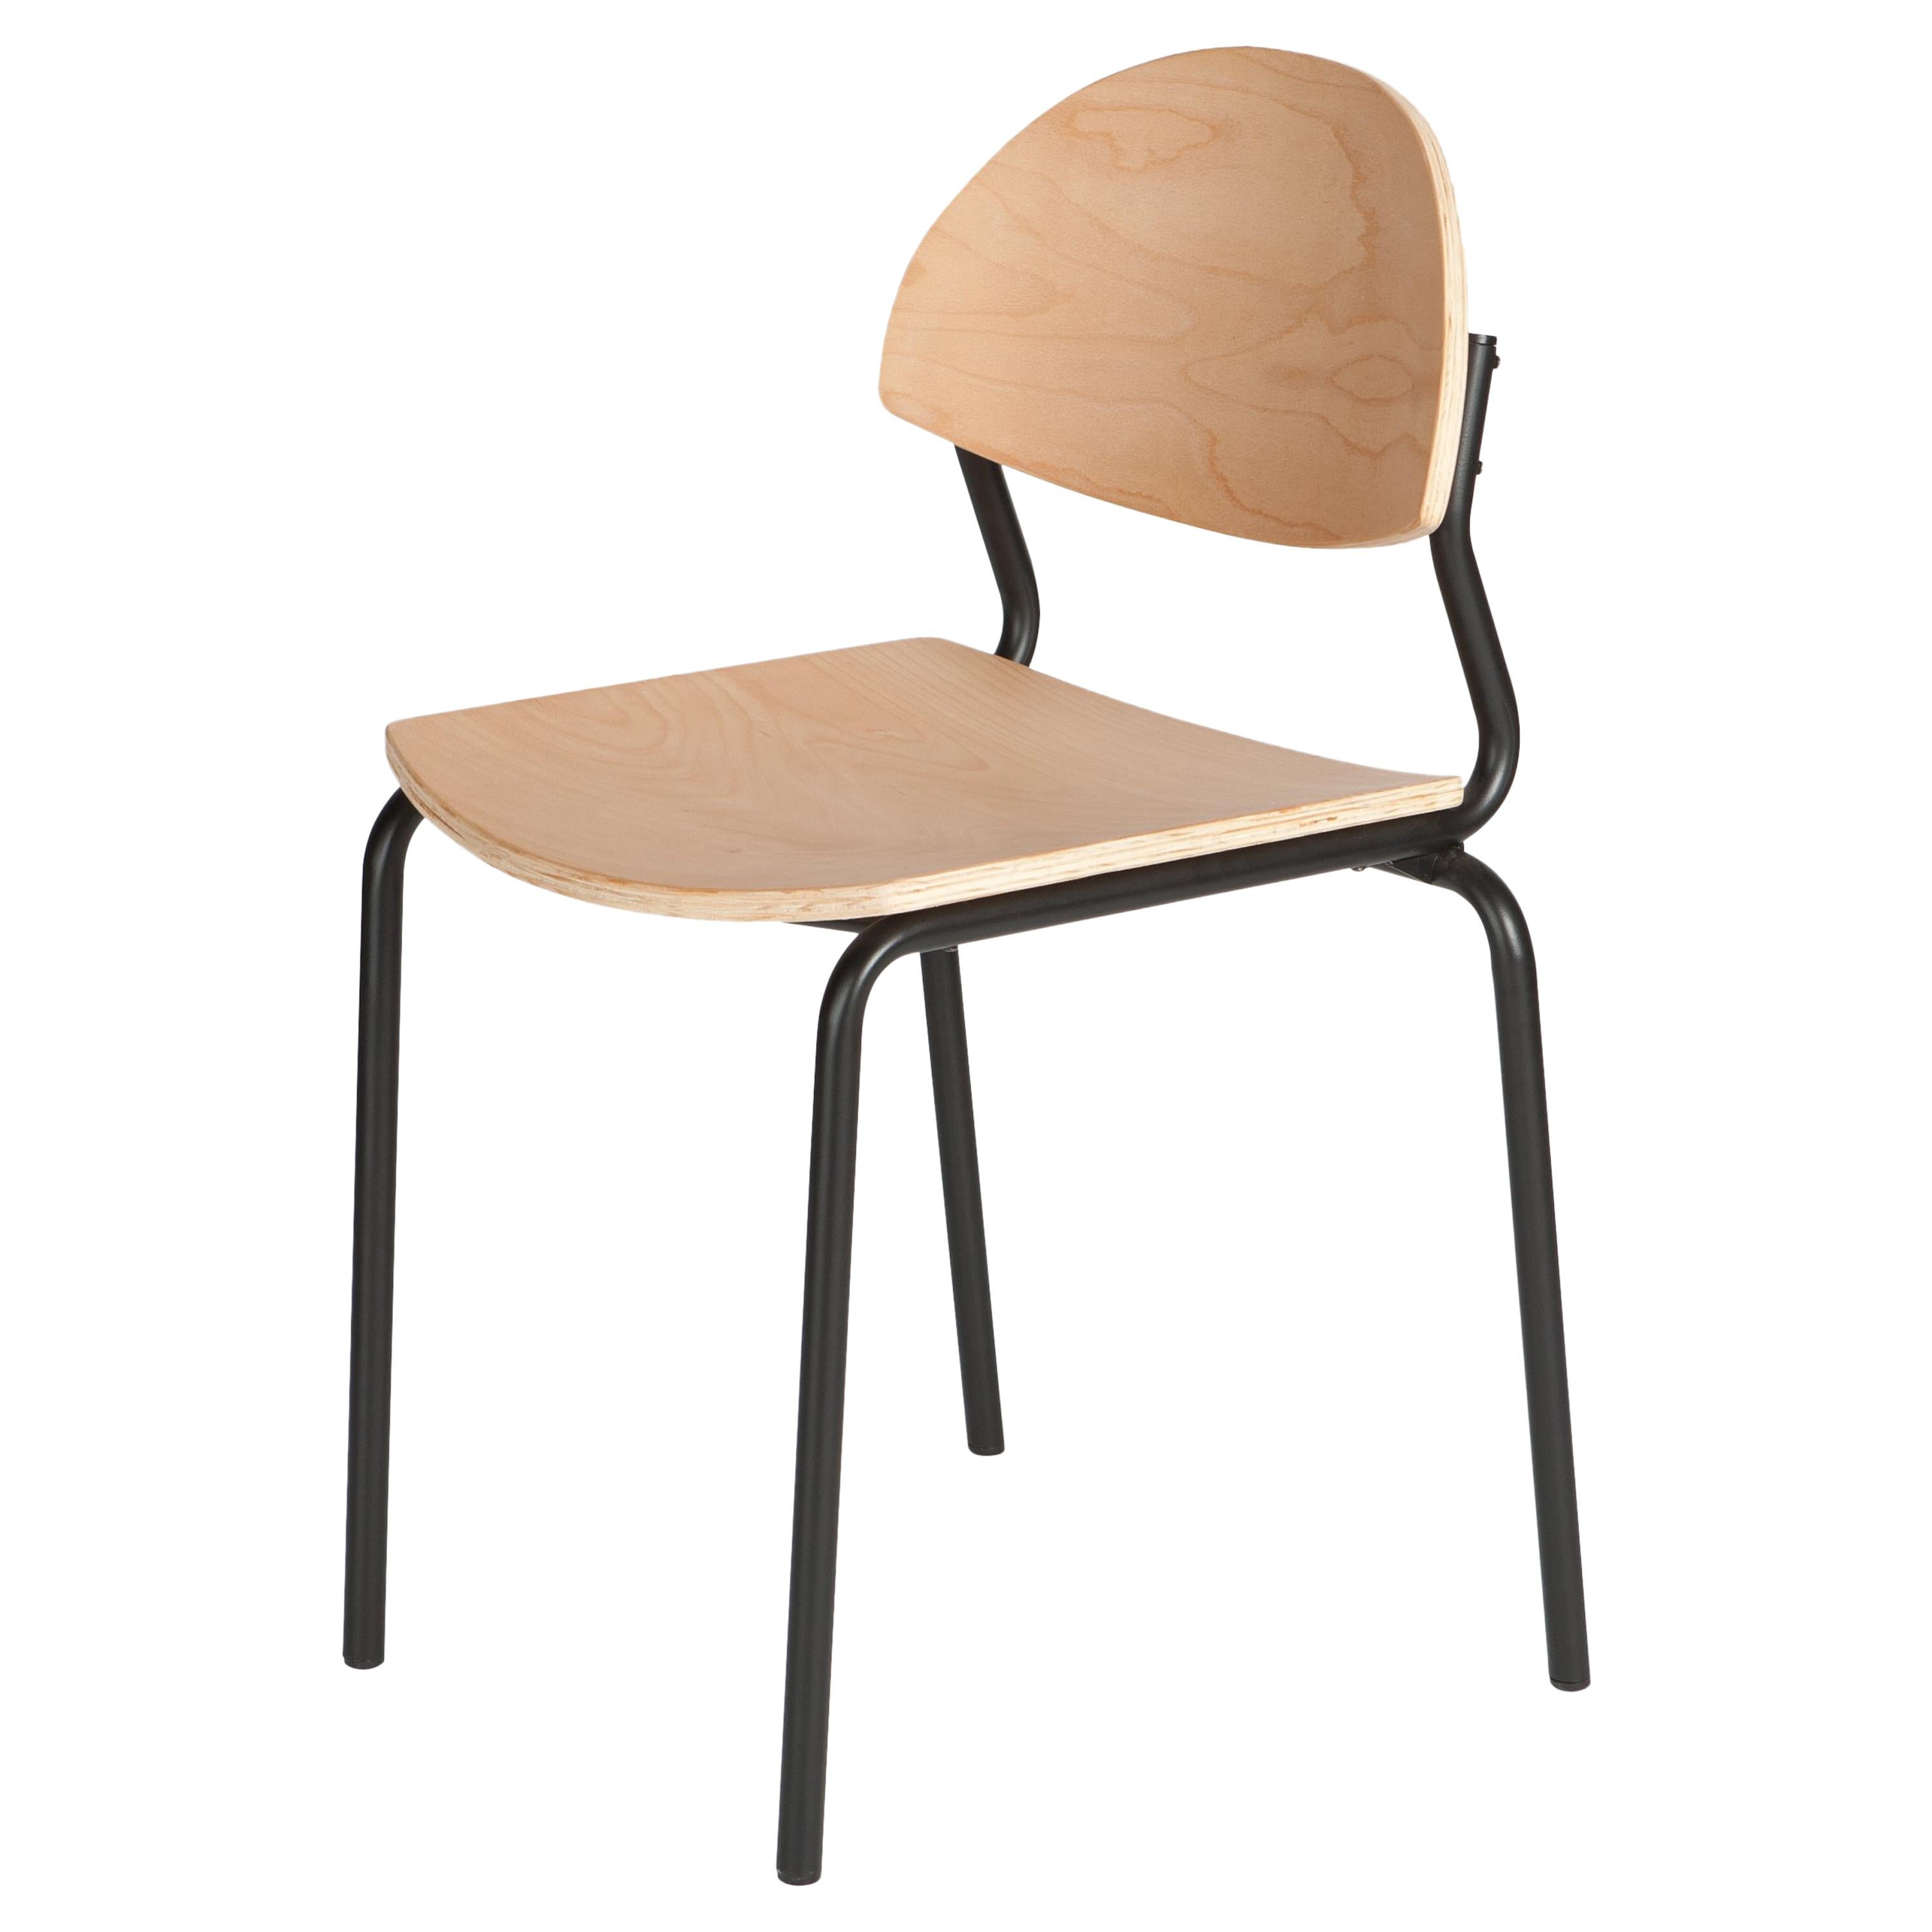 Chips Dining Chair, Black Steel Tube Frame or Beech Timber Seat